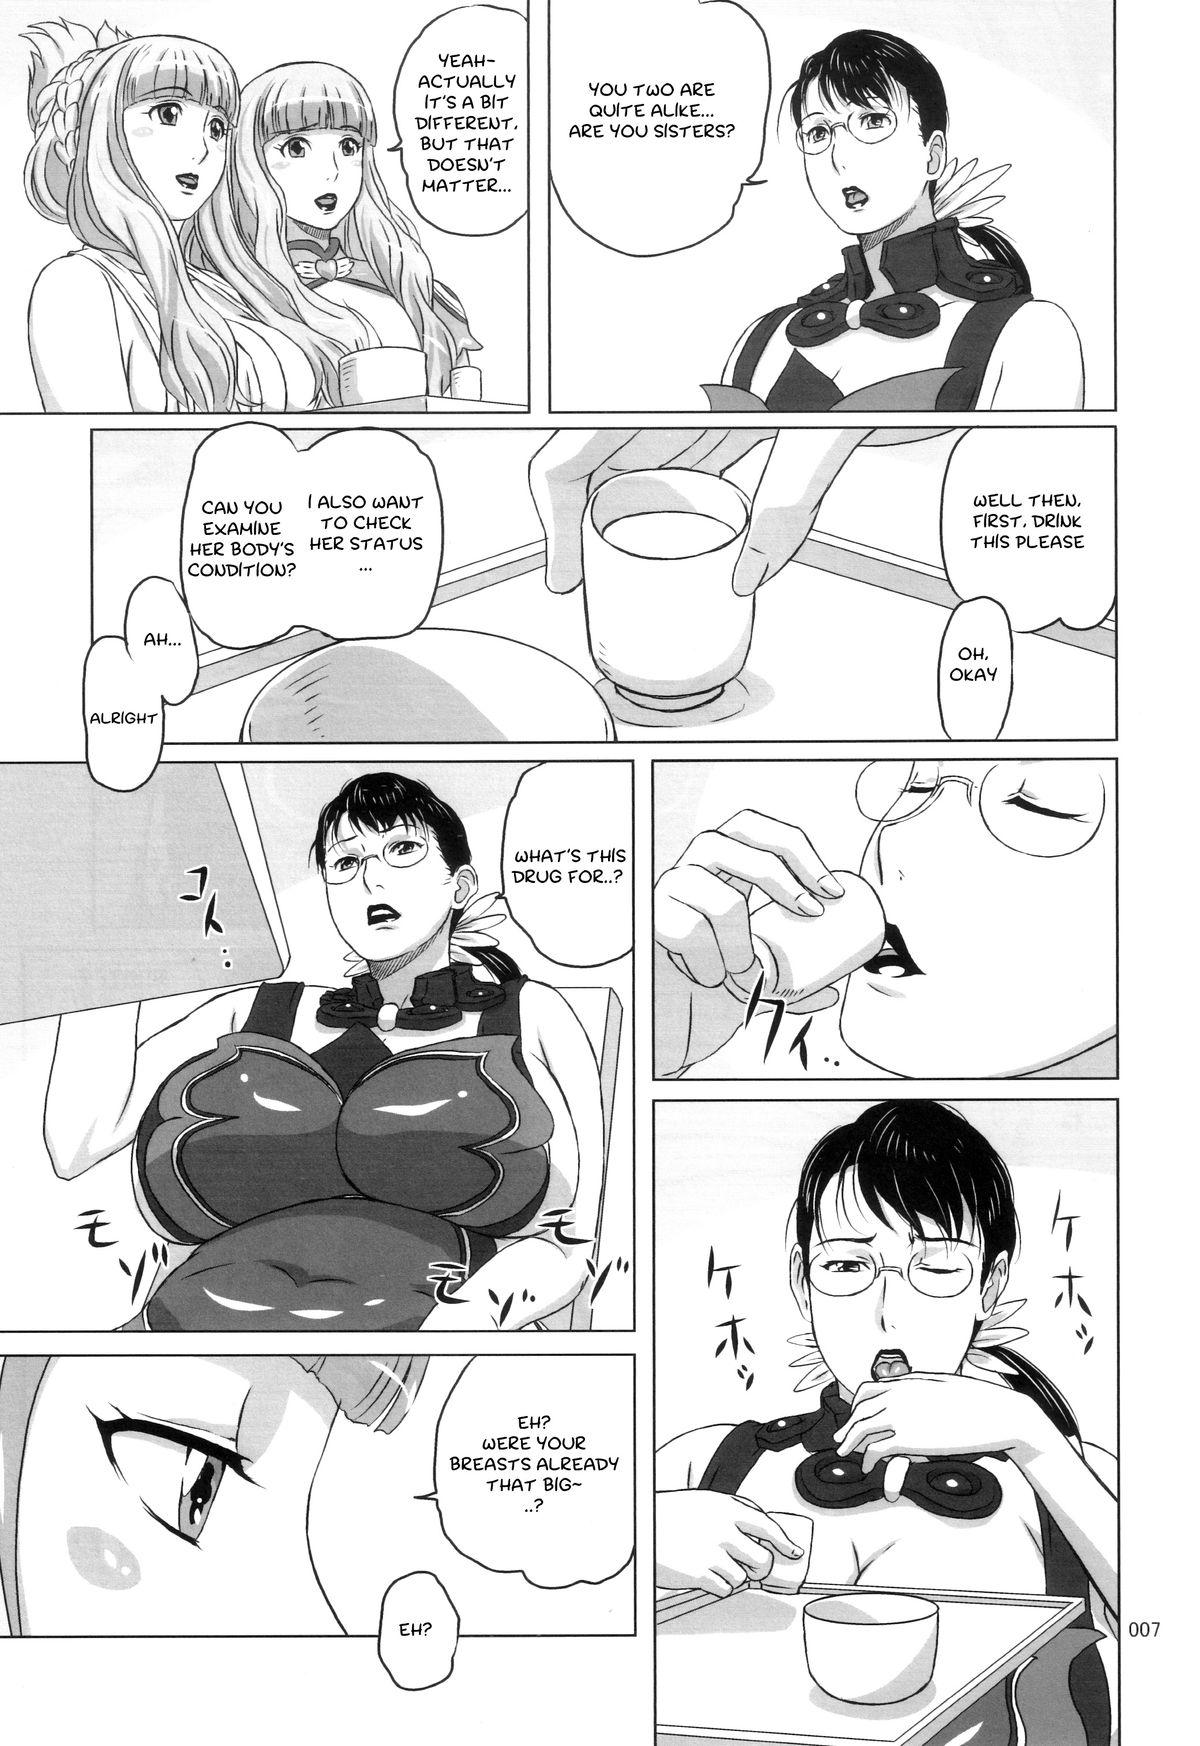 Insertion Package Meat 4.5 - Queens blade Couple Sex - Page 6